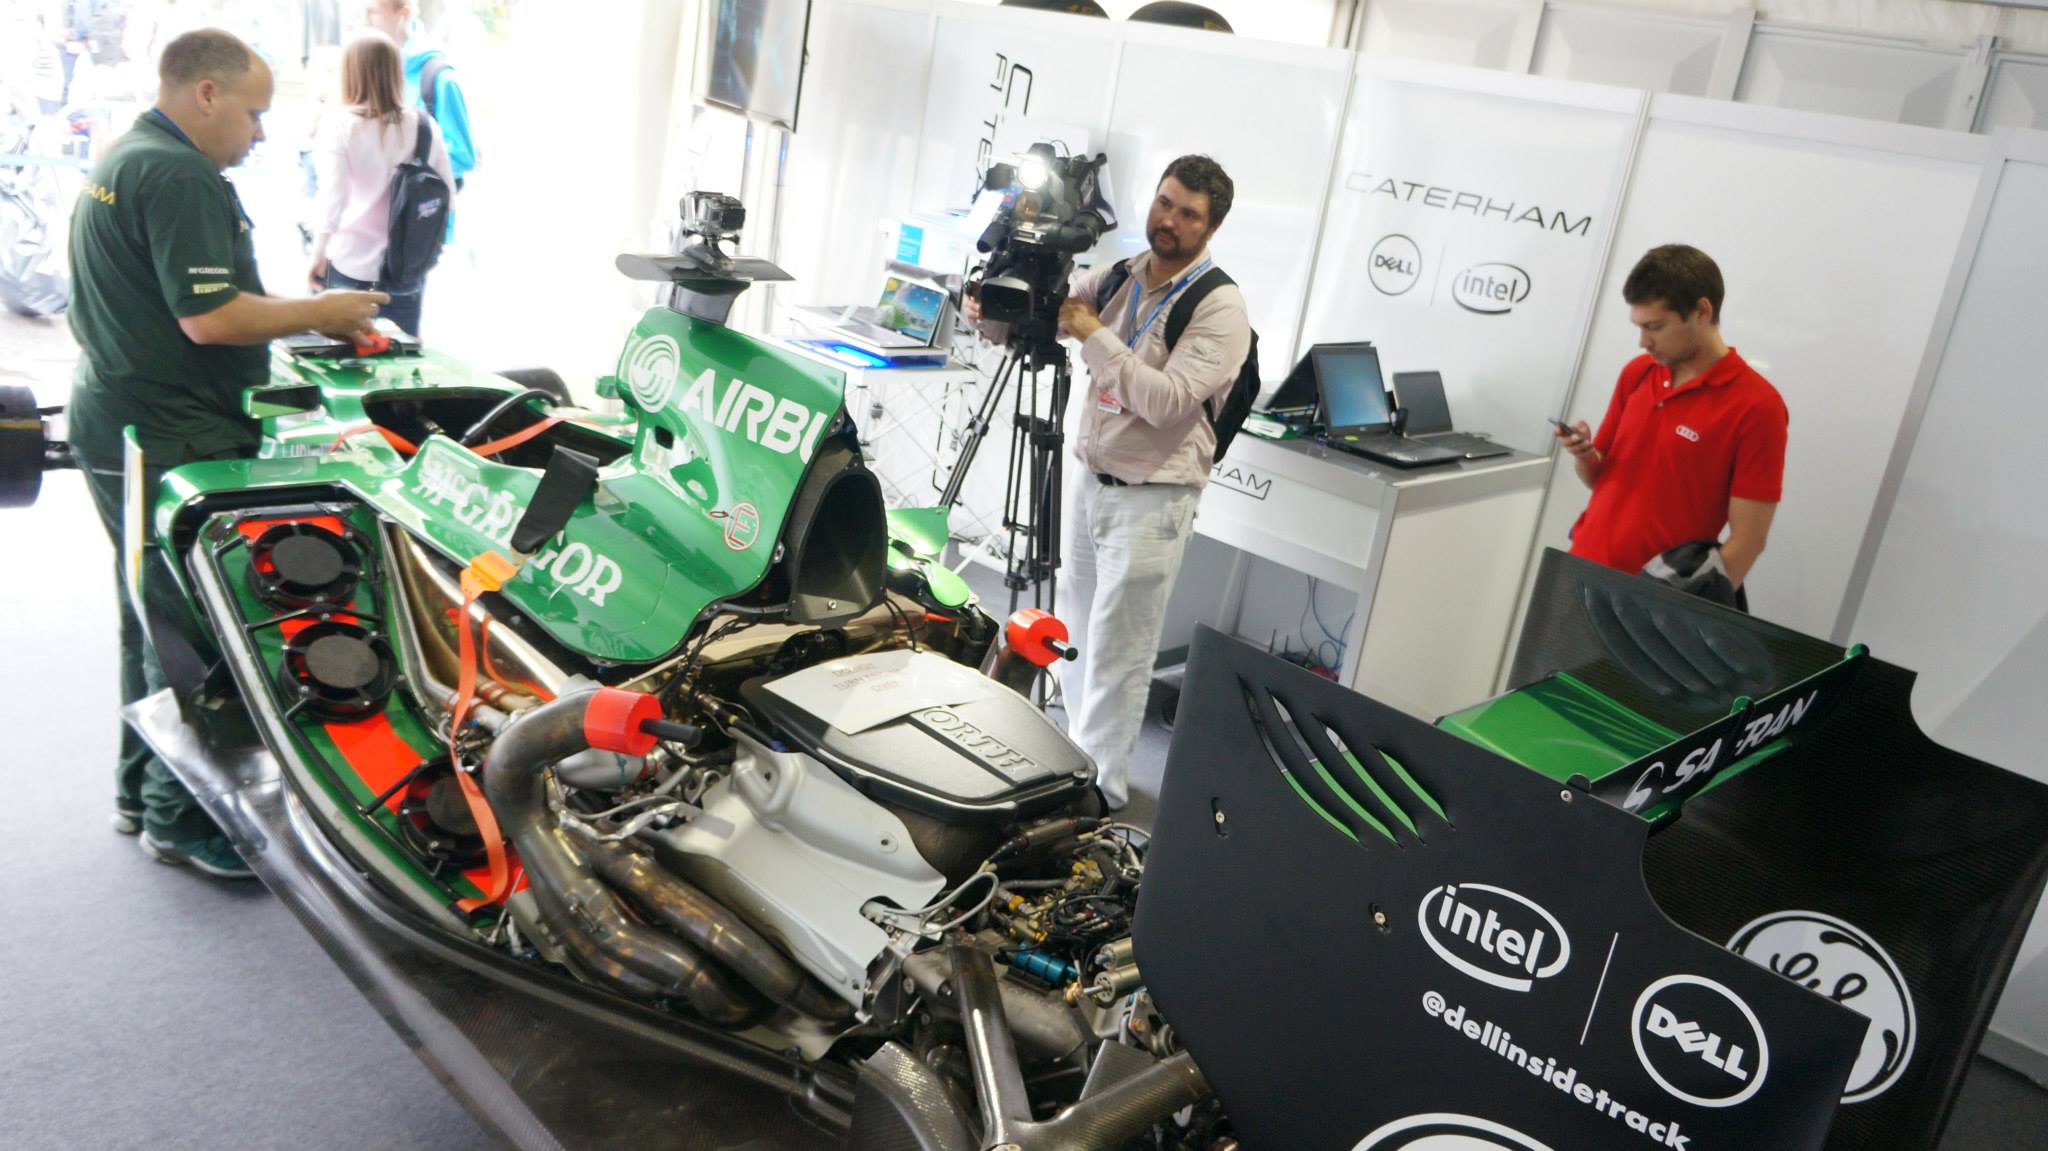 Caterham F1 Team & Dell @ Moscow City Racing 2013